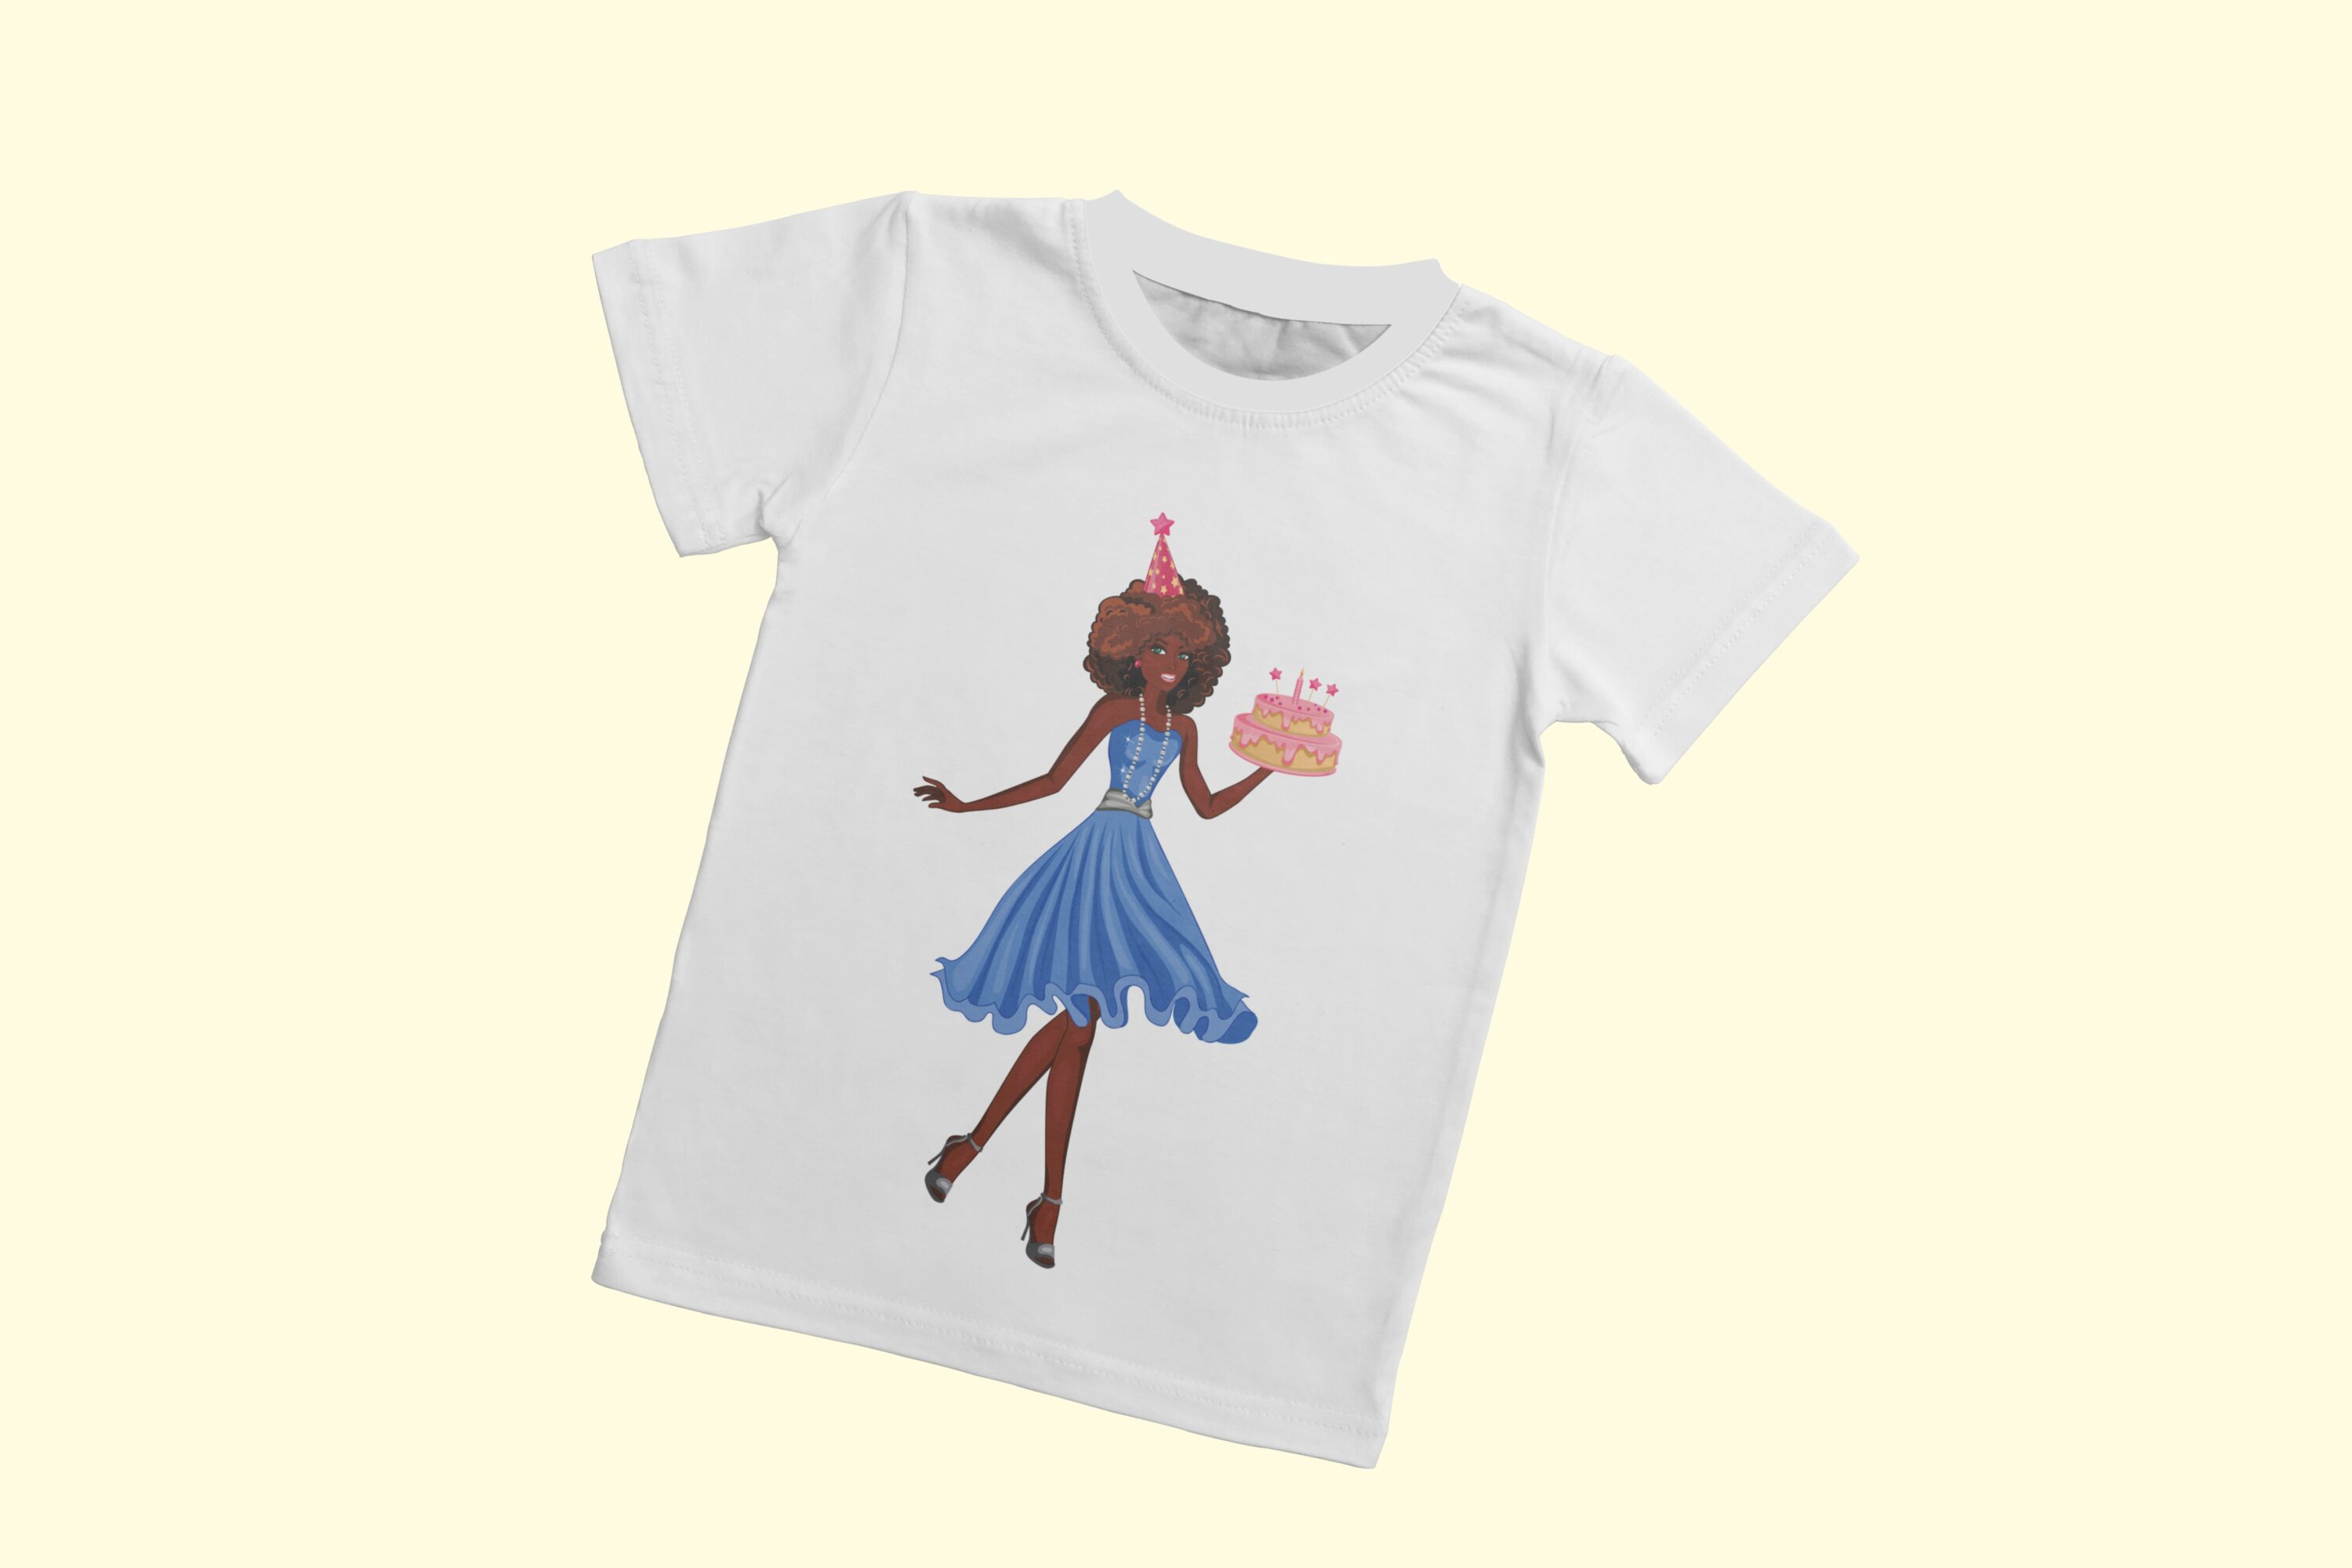 Portrait of a dark-skinned girl on a T-shirt.